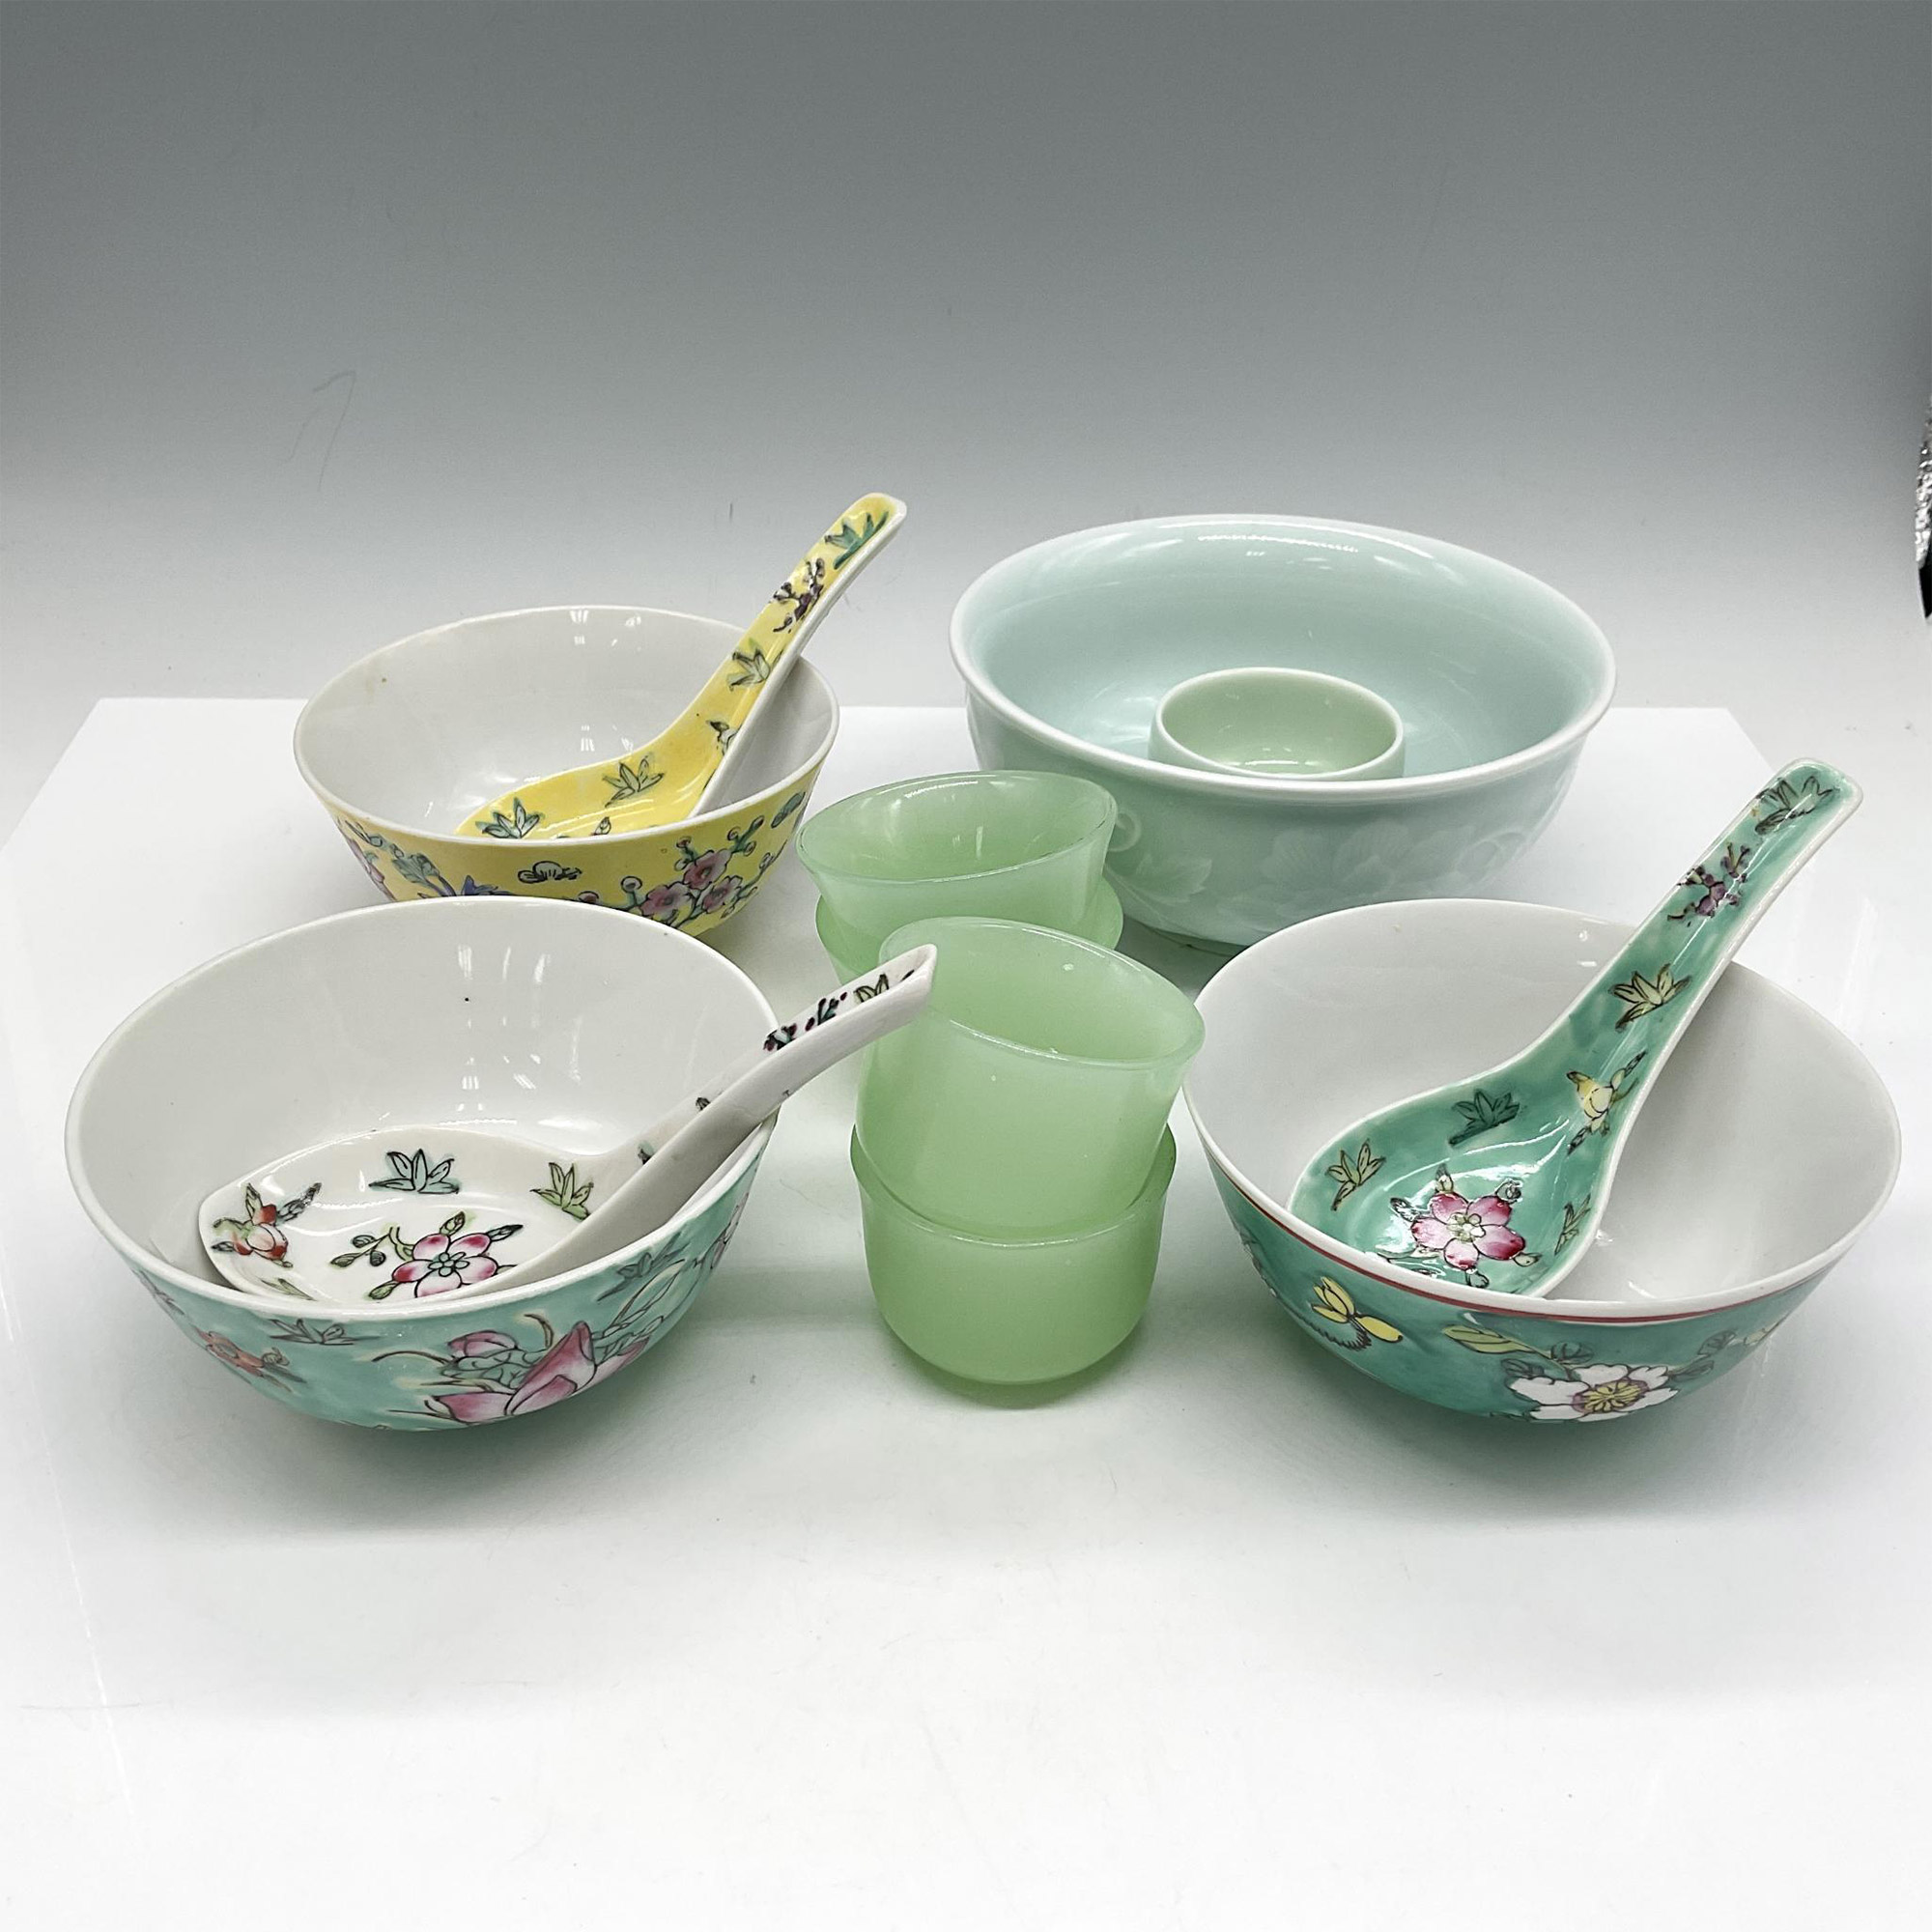 12pc Chinese and Japanese Porcelain Bowls + Sake Cups - Image 2 of 3